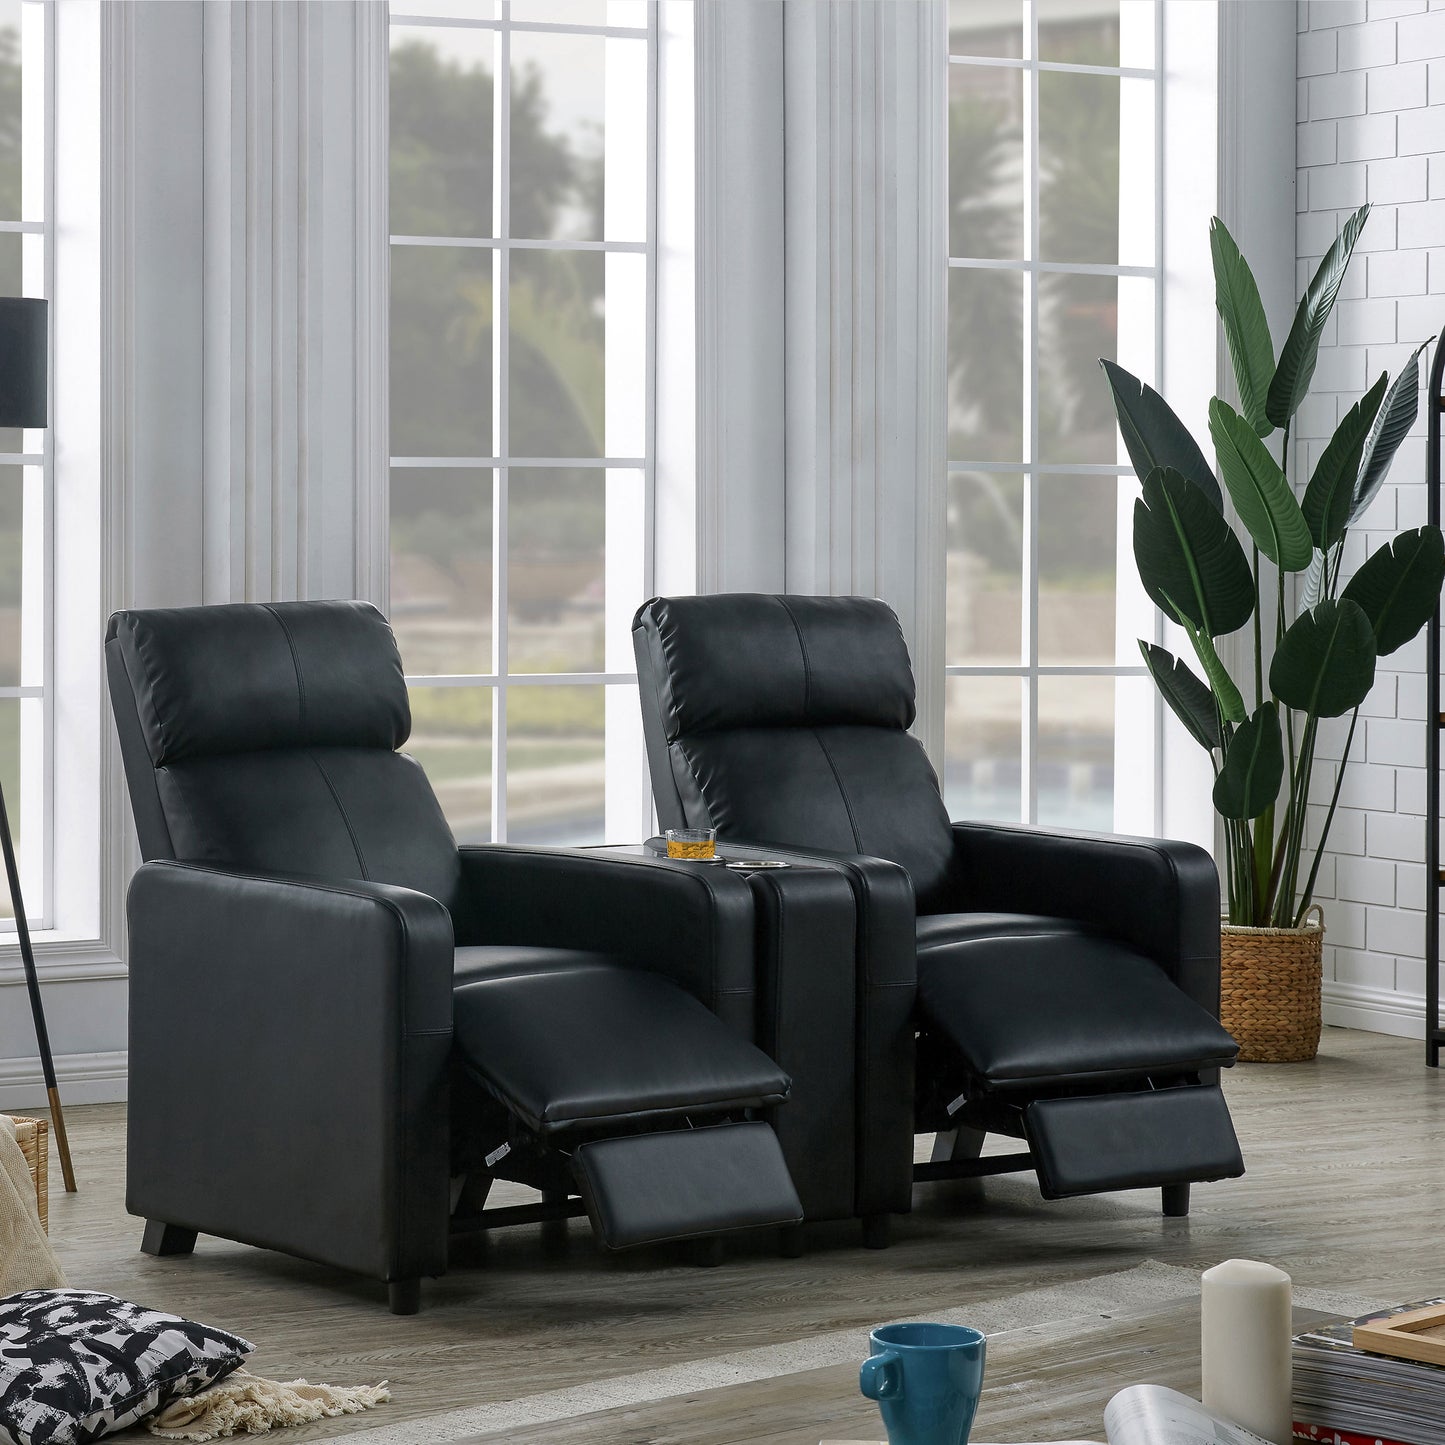 Toohey Home Theater Push Back Recliner Black